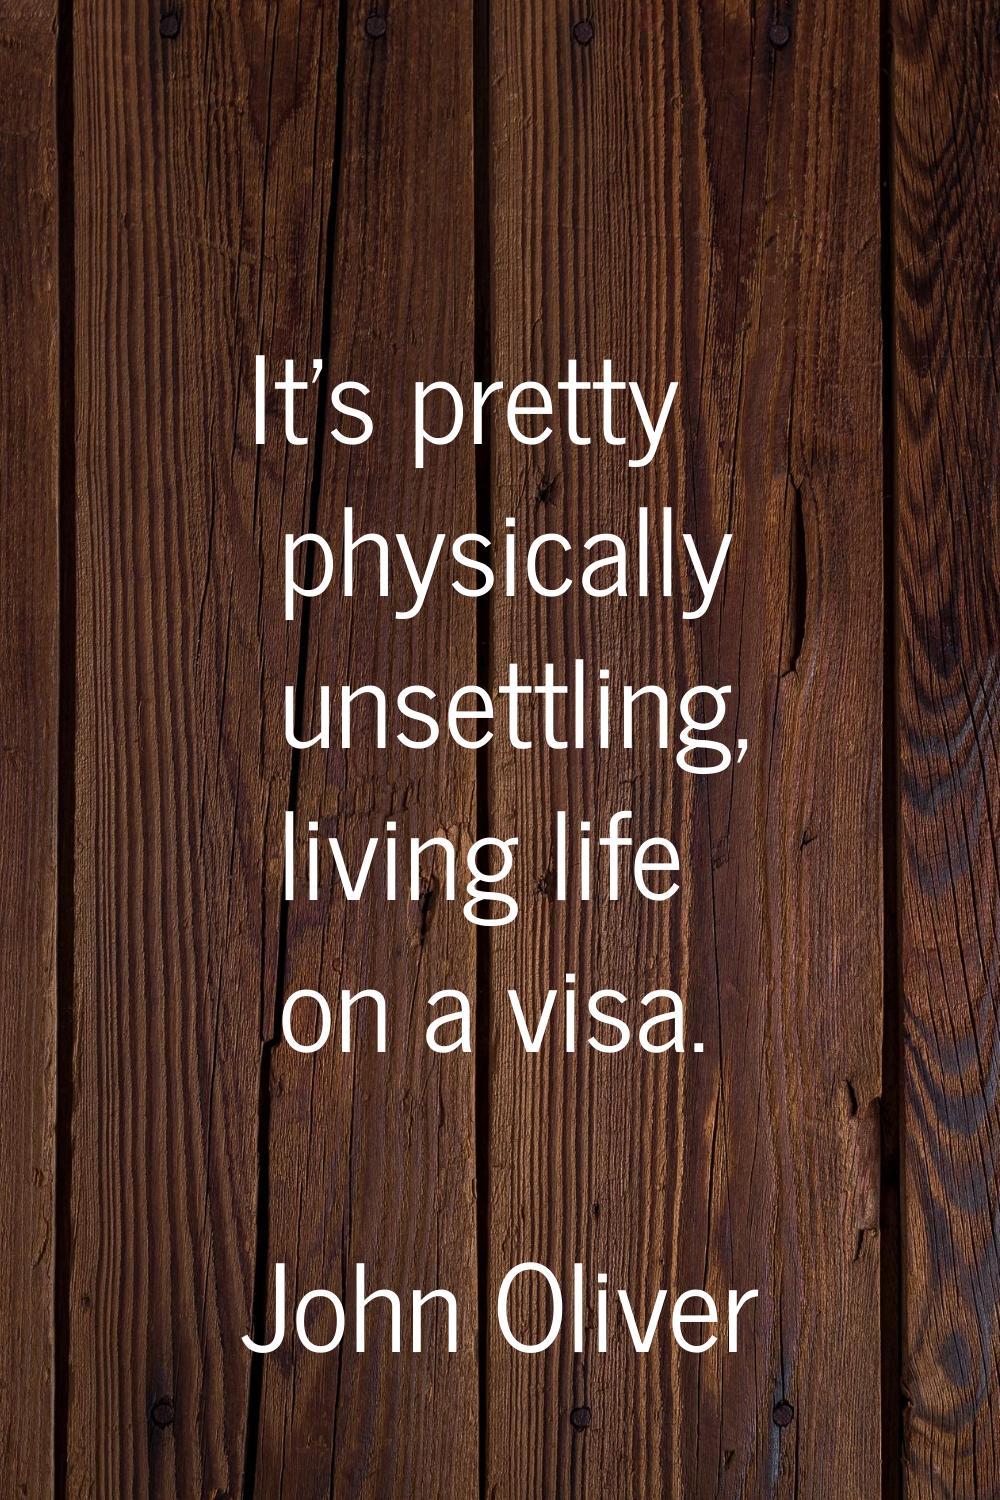 It's pretty physically unsettling, living life on a visa.